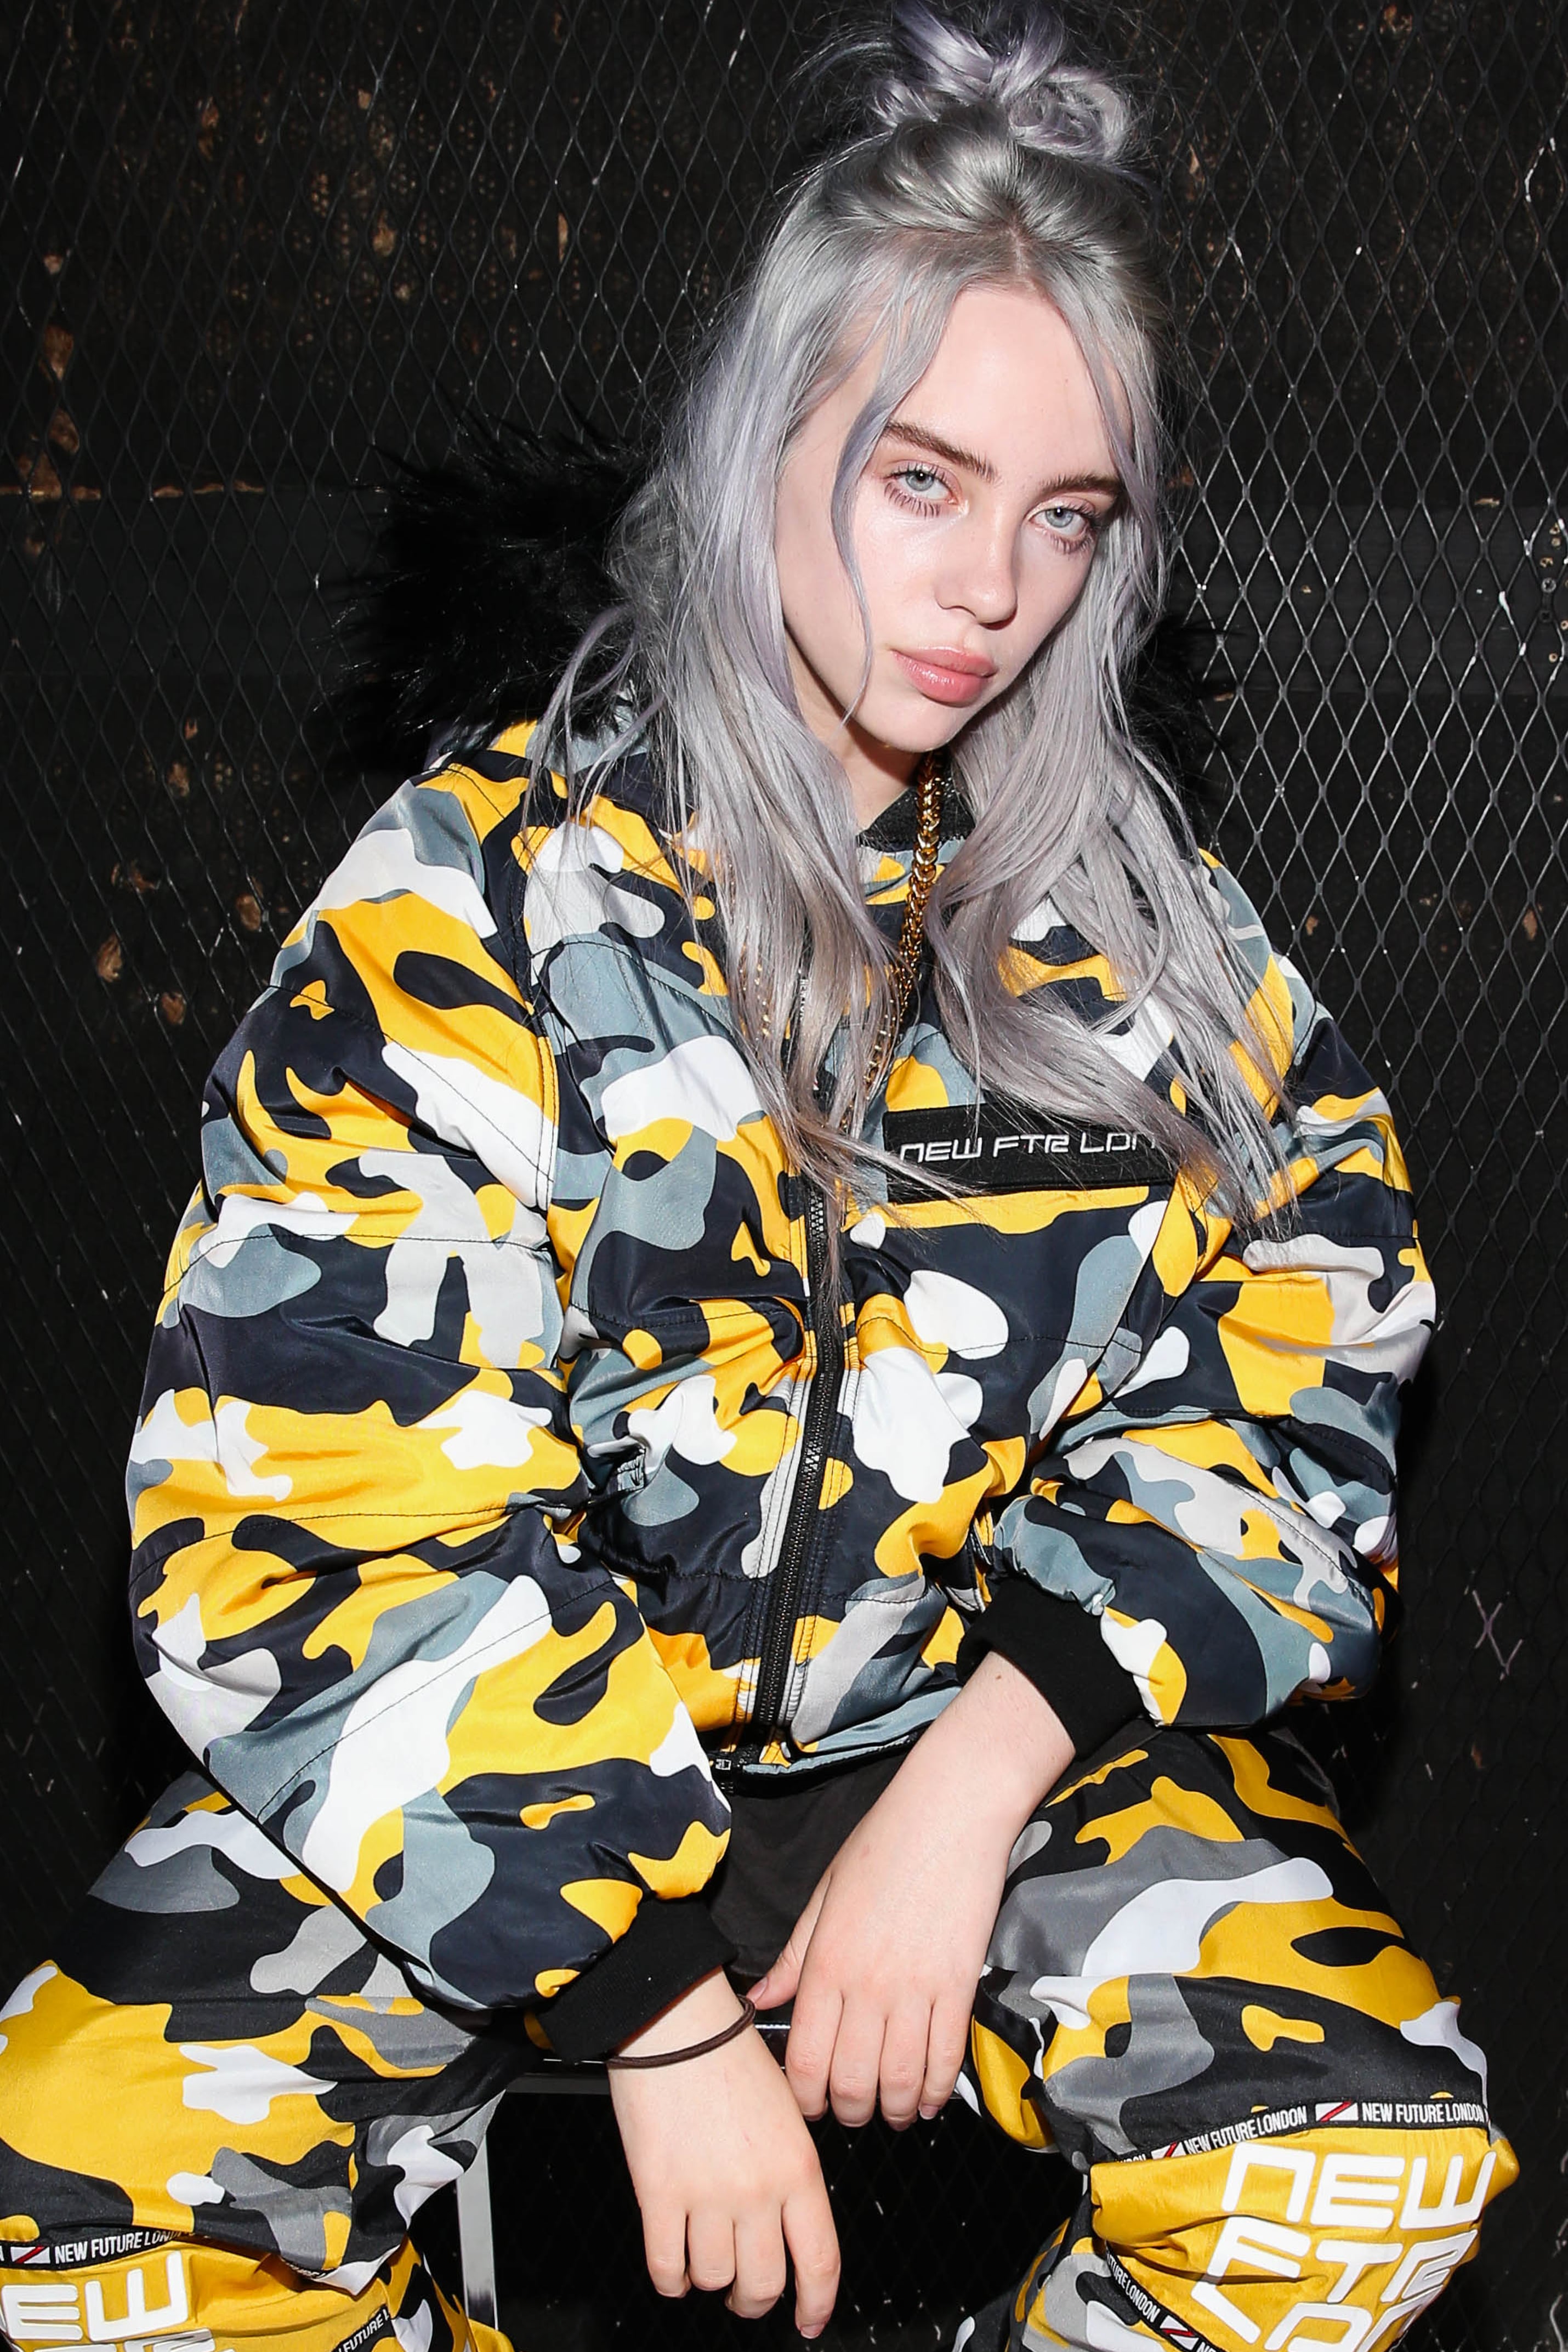 For Billie Eilish, Power Dressing Means Baggy Clothes